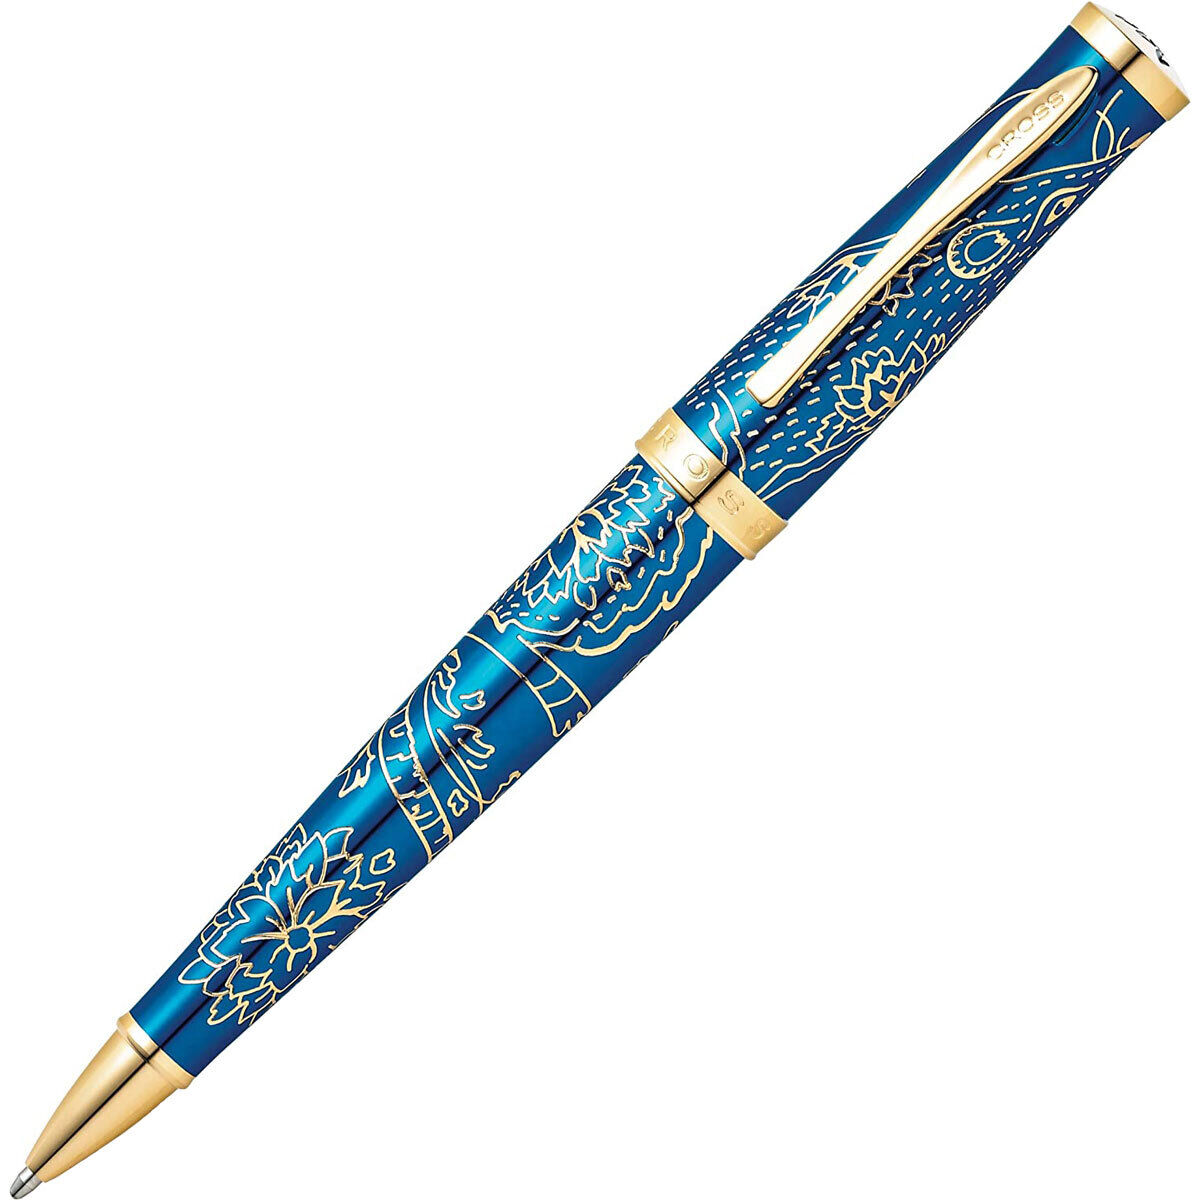 Cross Ballpoint Pen Sauvage 2021 Year of the Rat Blue Brass and Gold AT0312-23